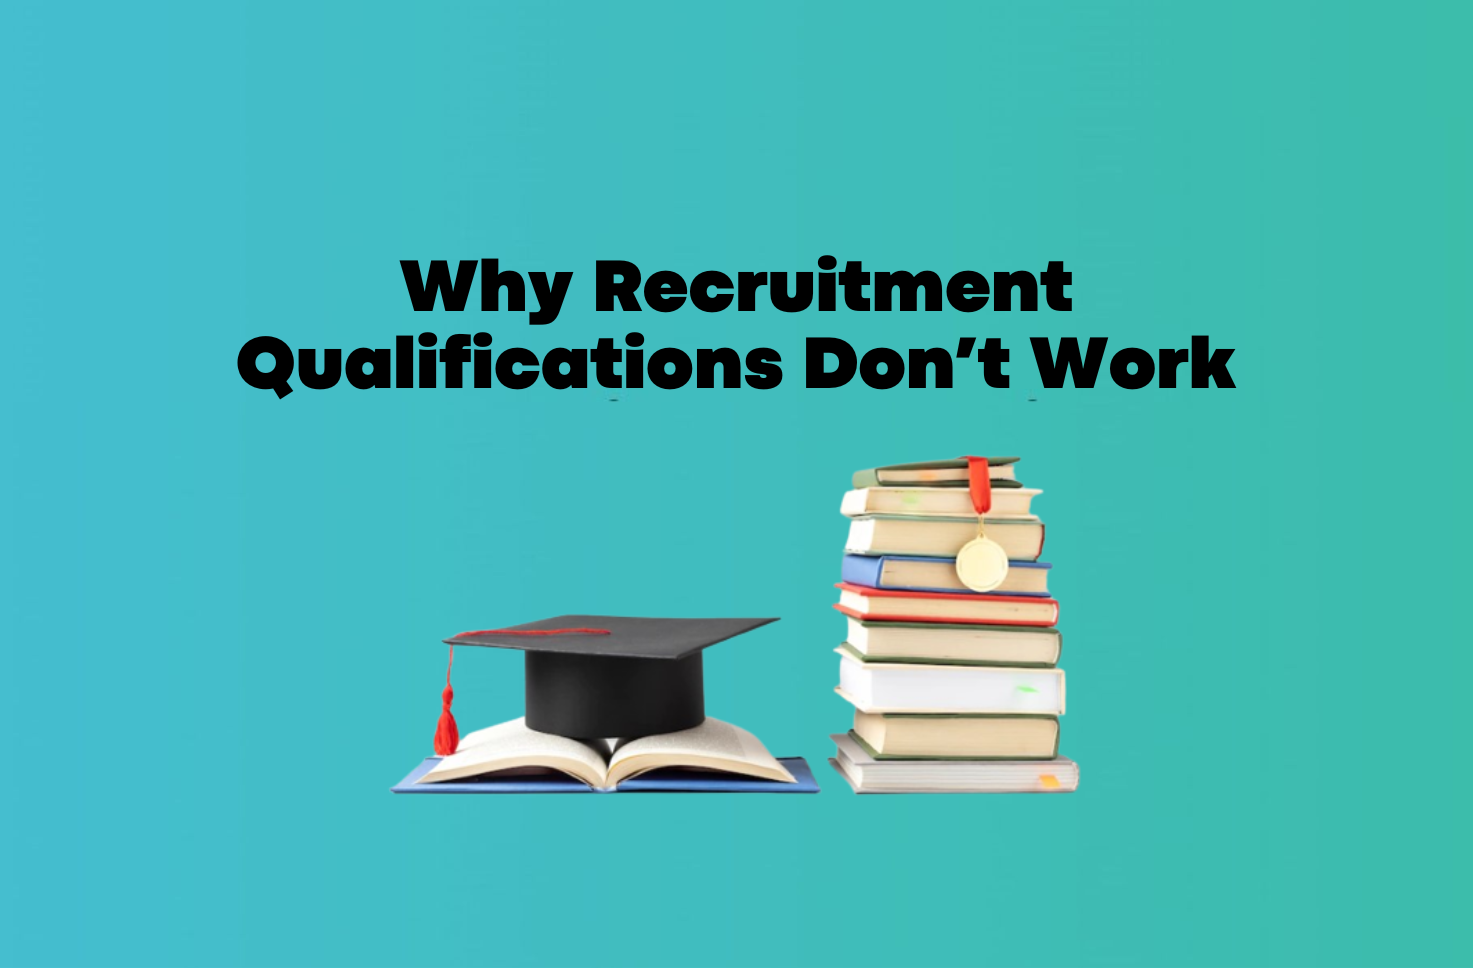 Why Recruitment Qualifications Don’t Work